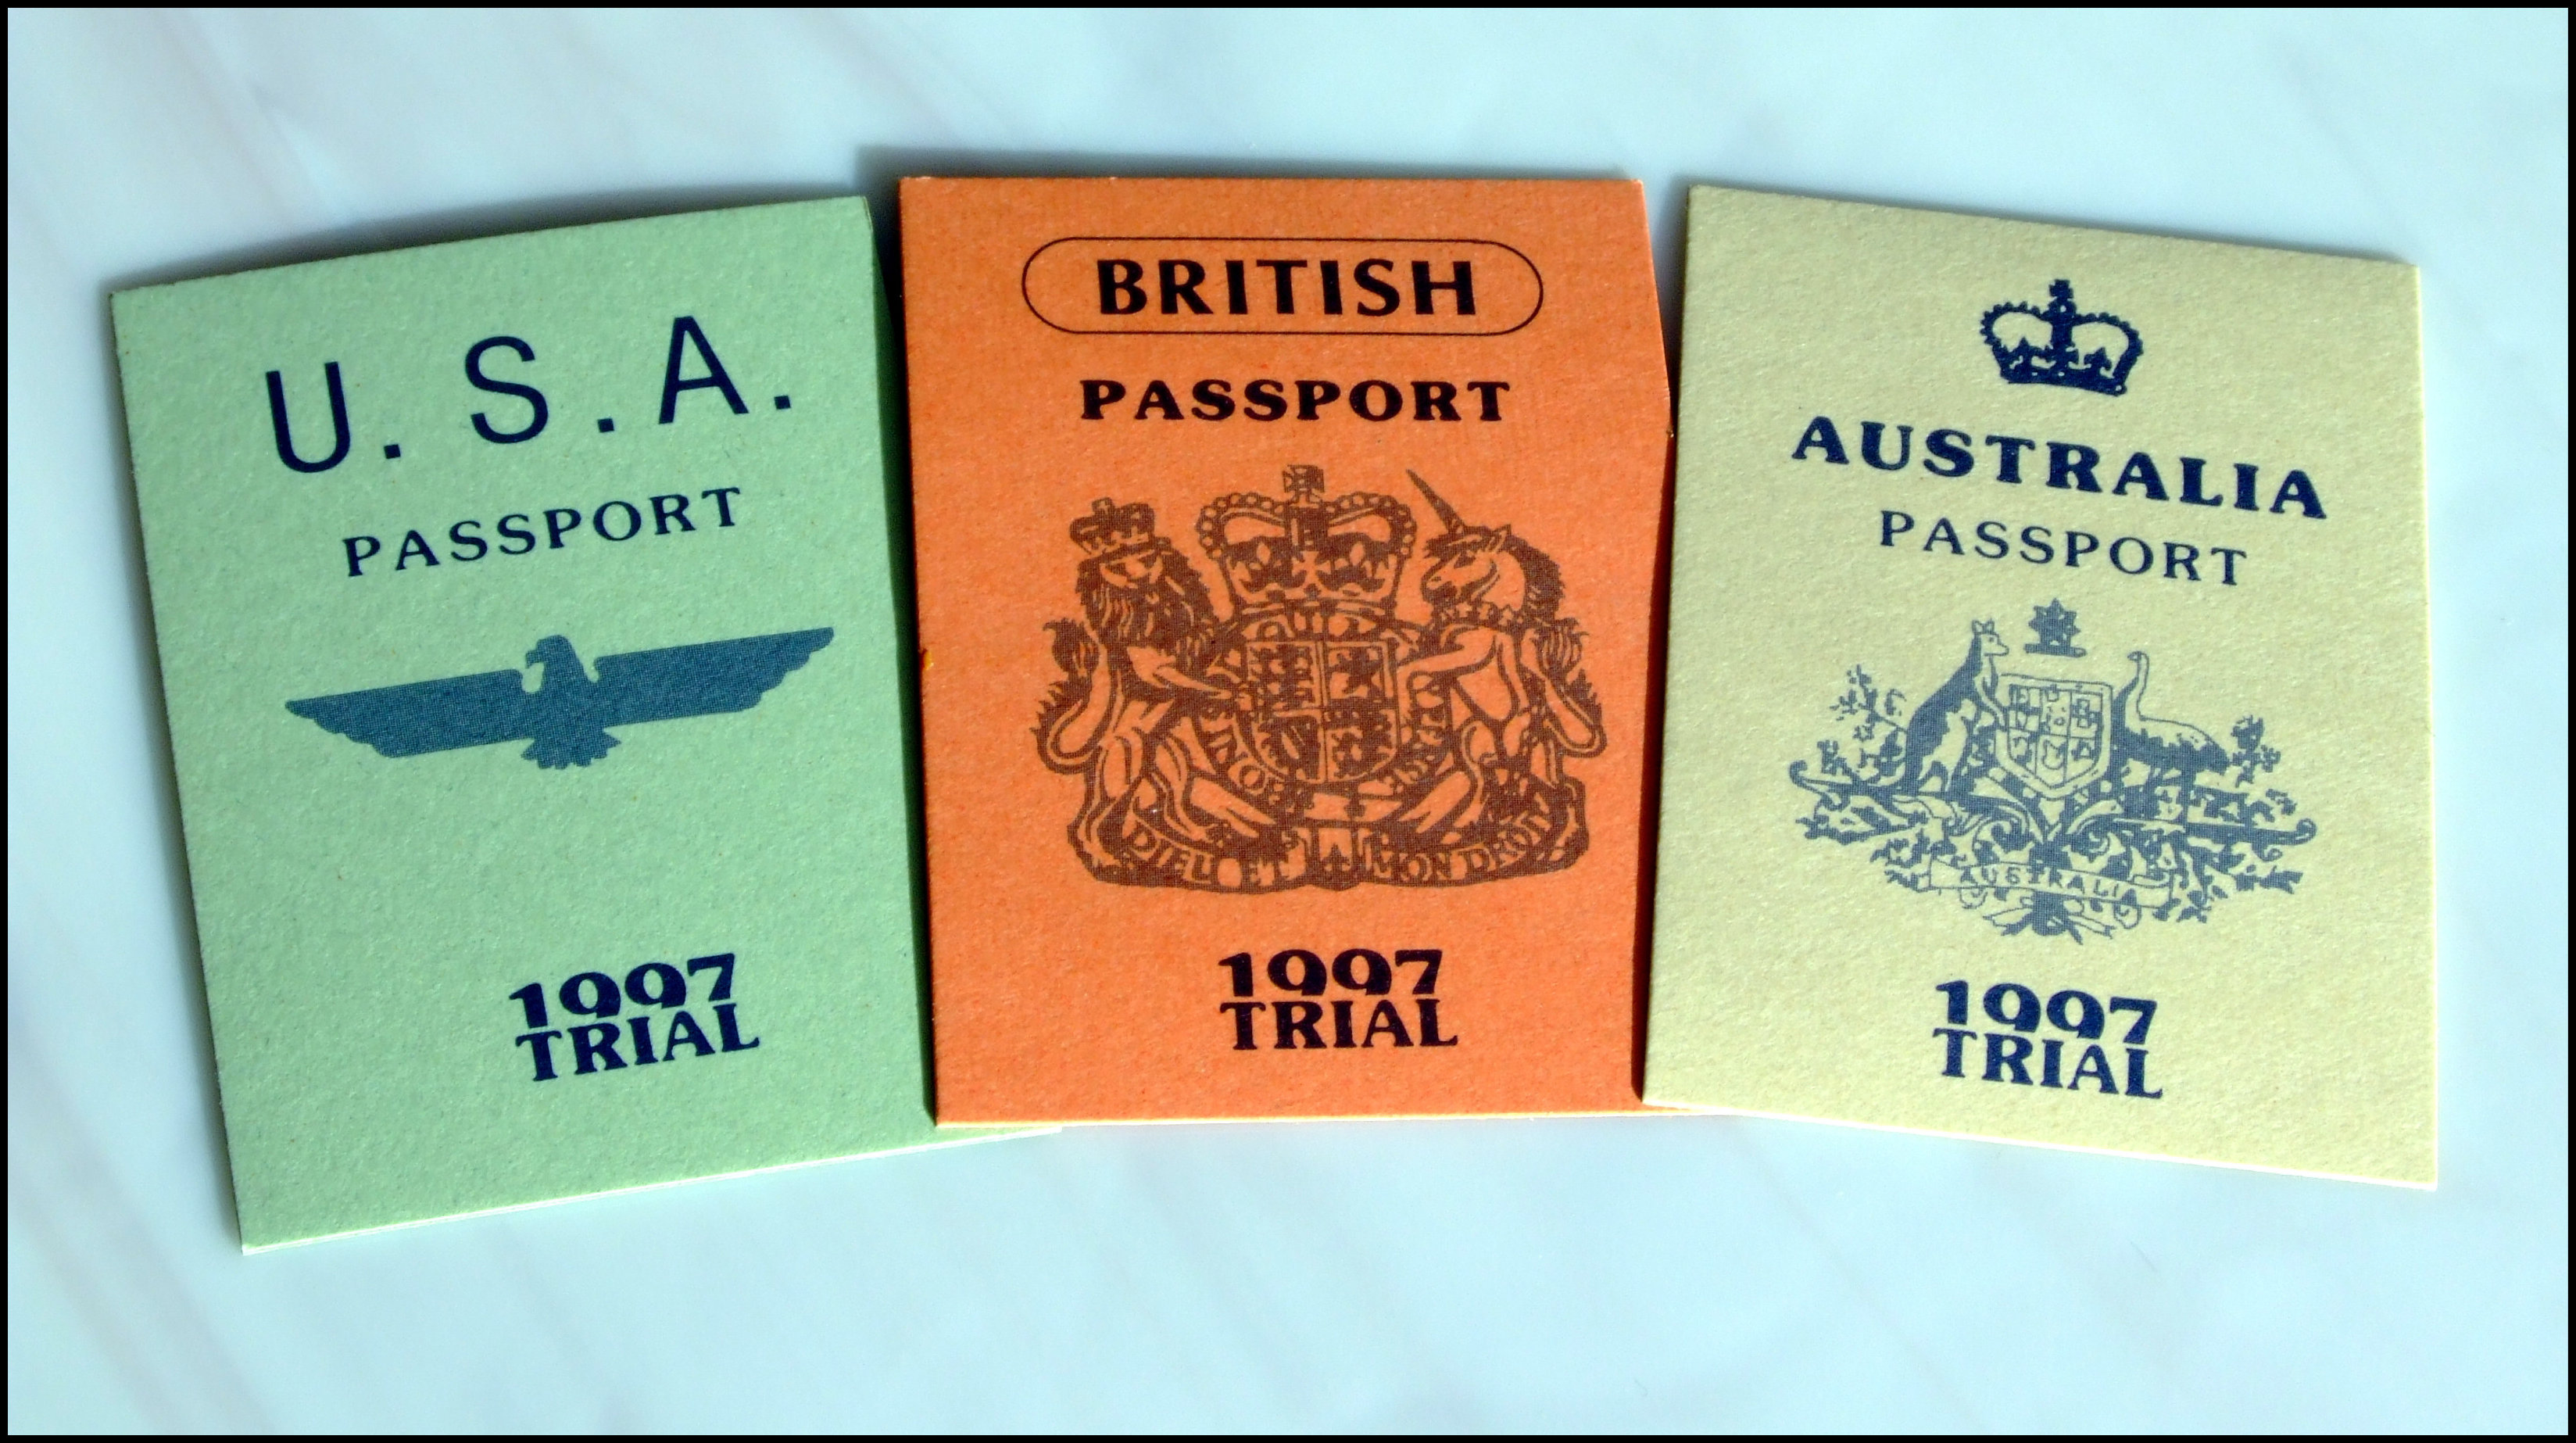 Trial 1997 - The Passports